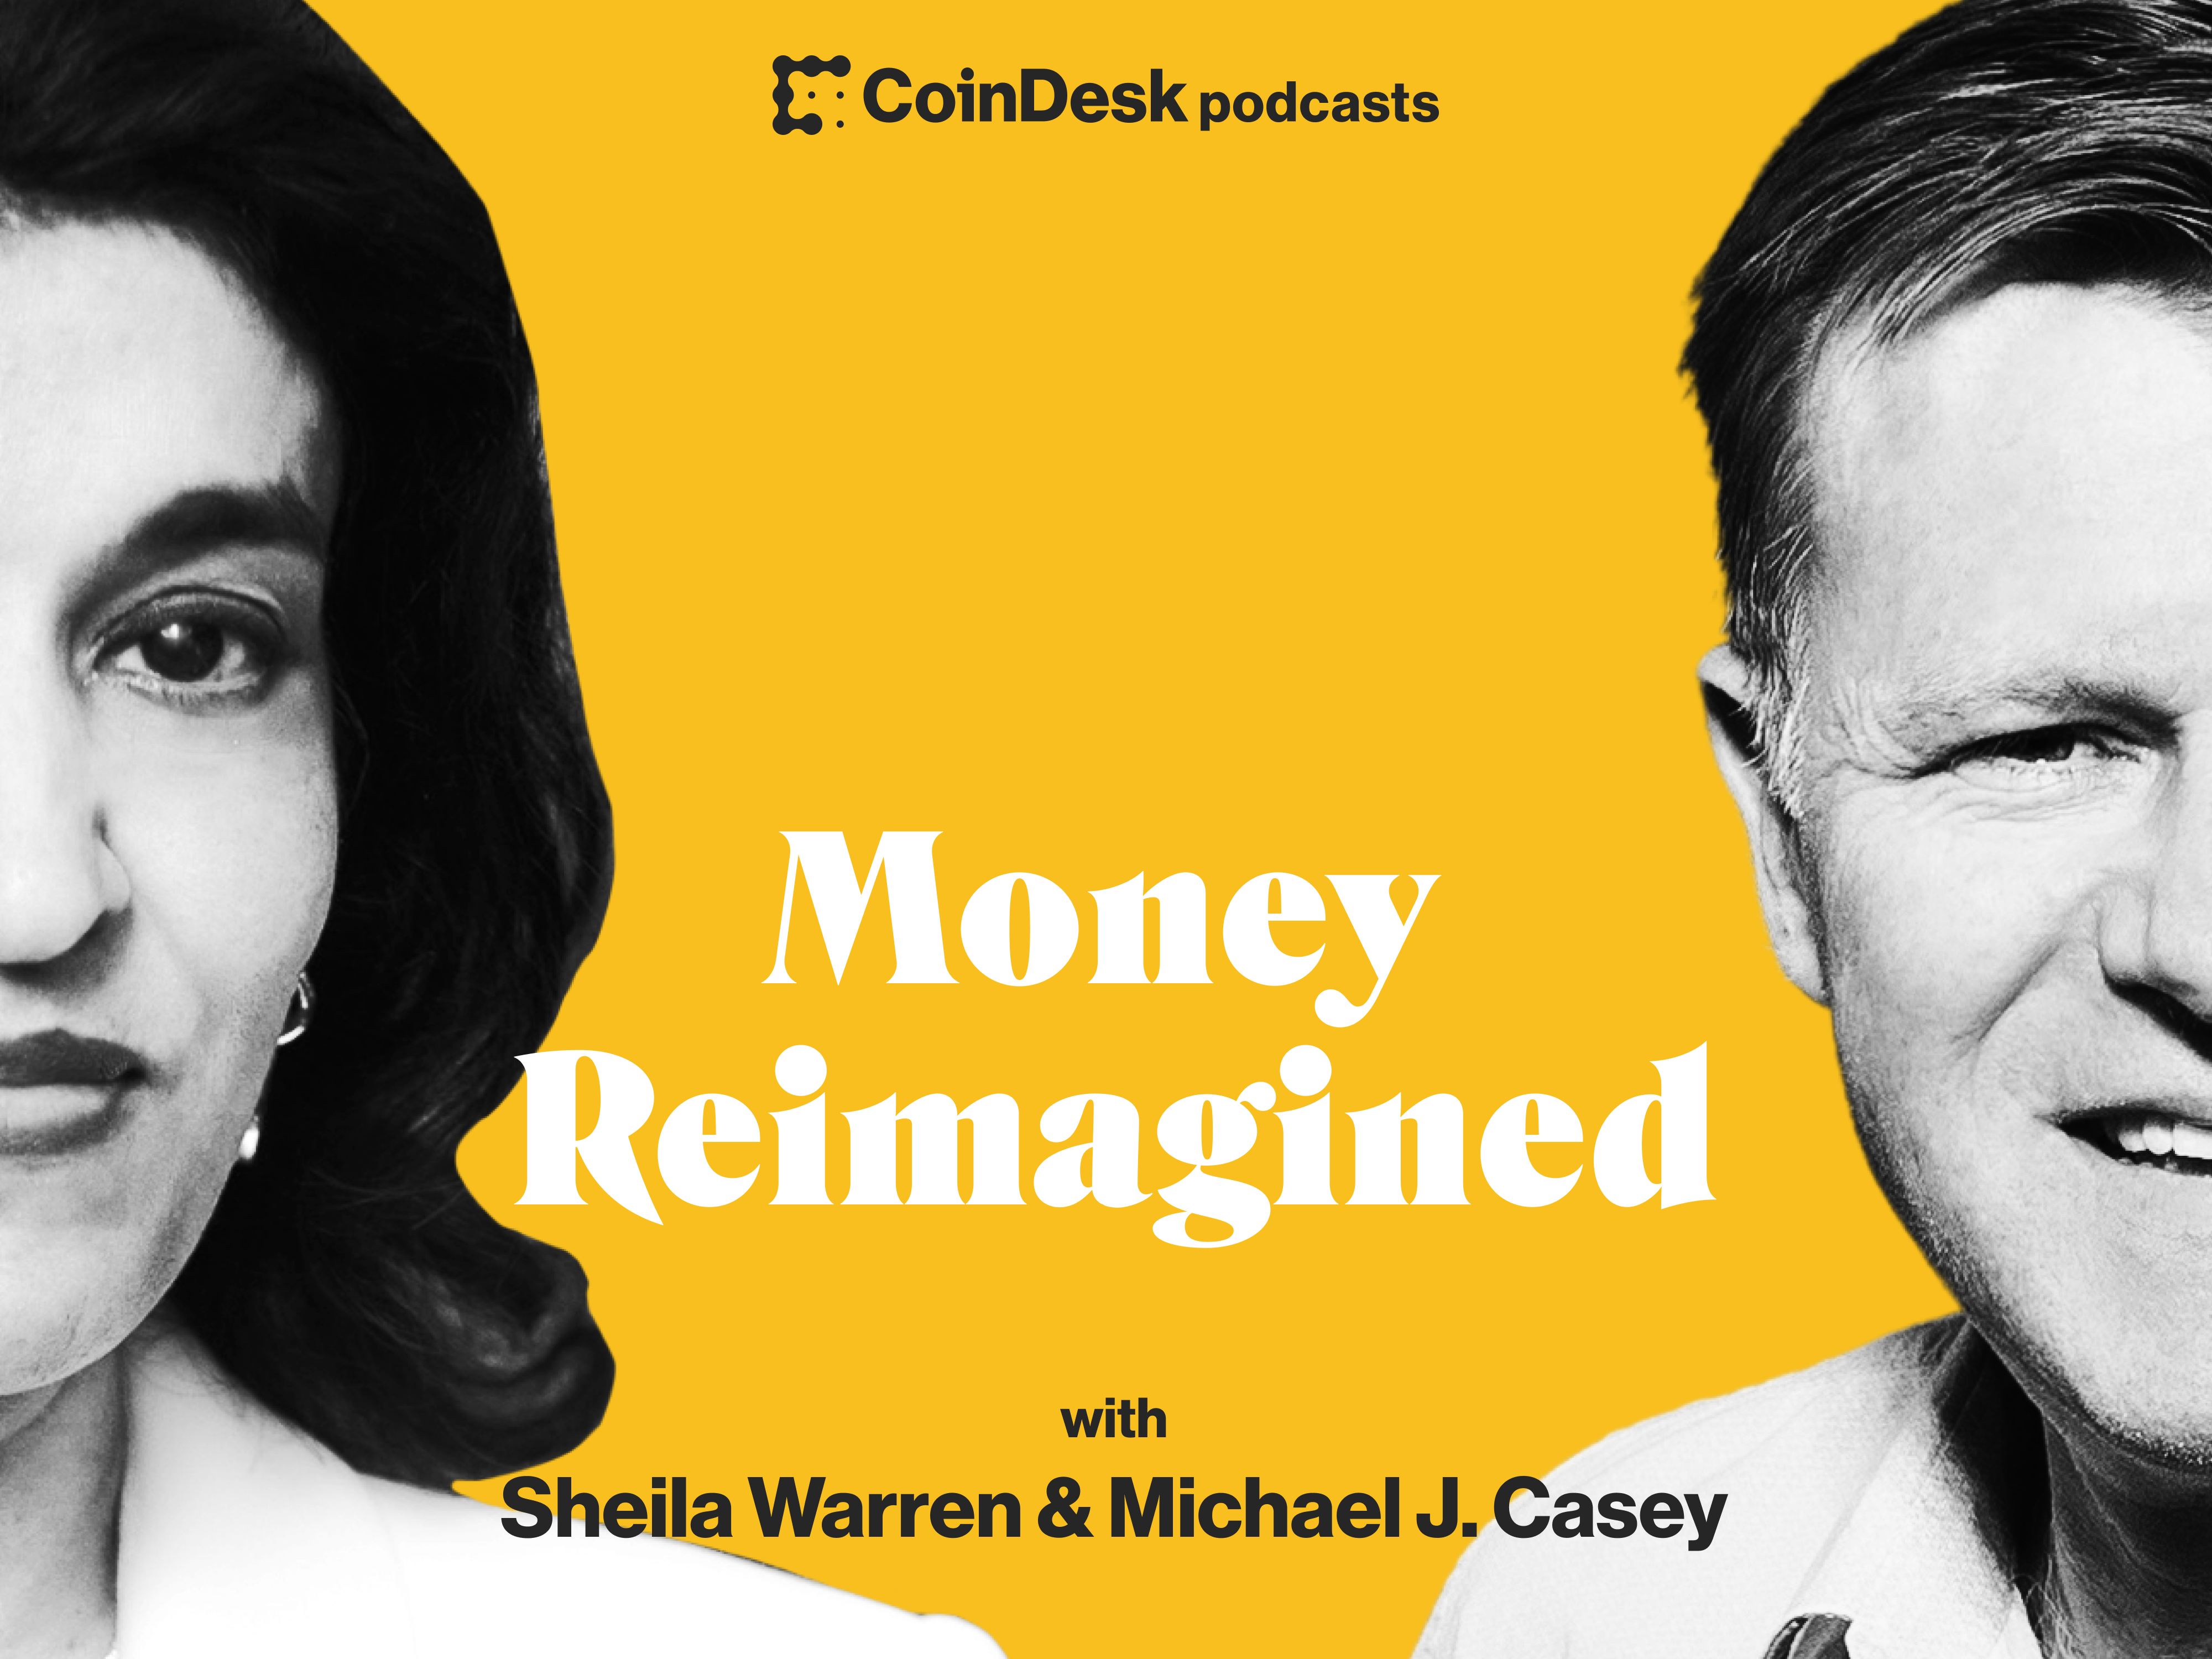 CoinDesk’s Money Reimagined